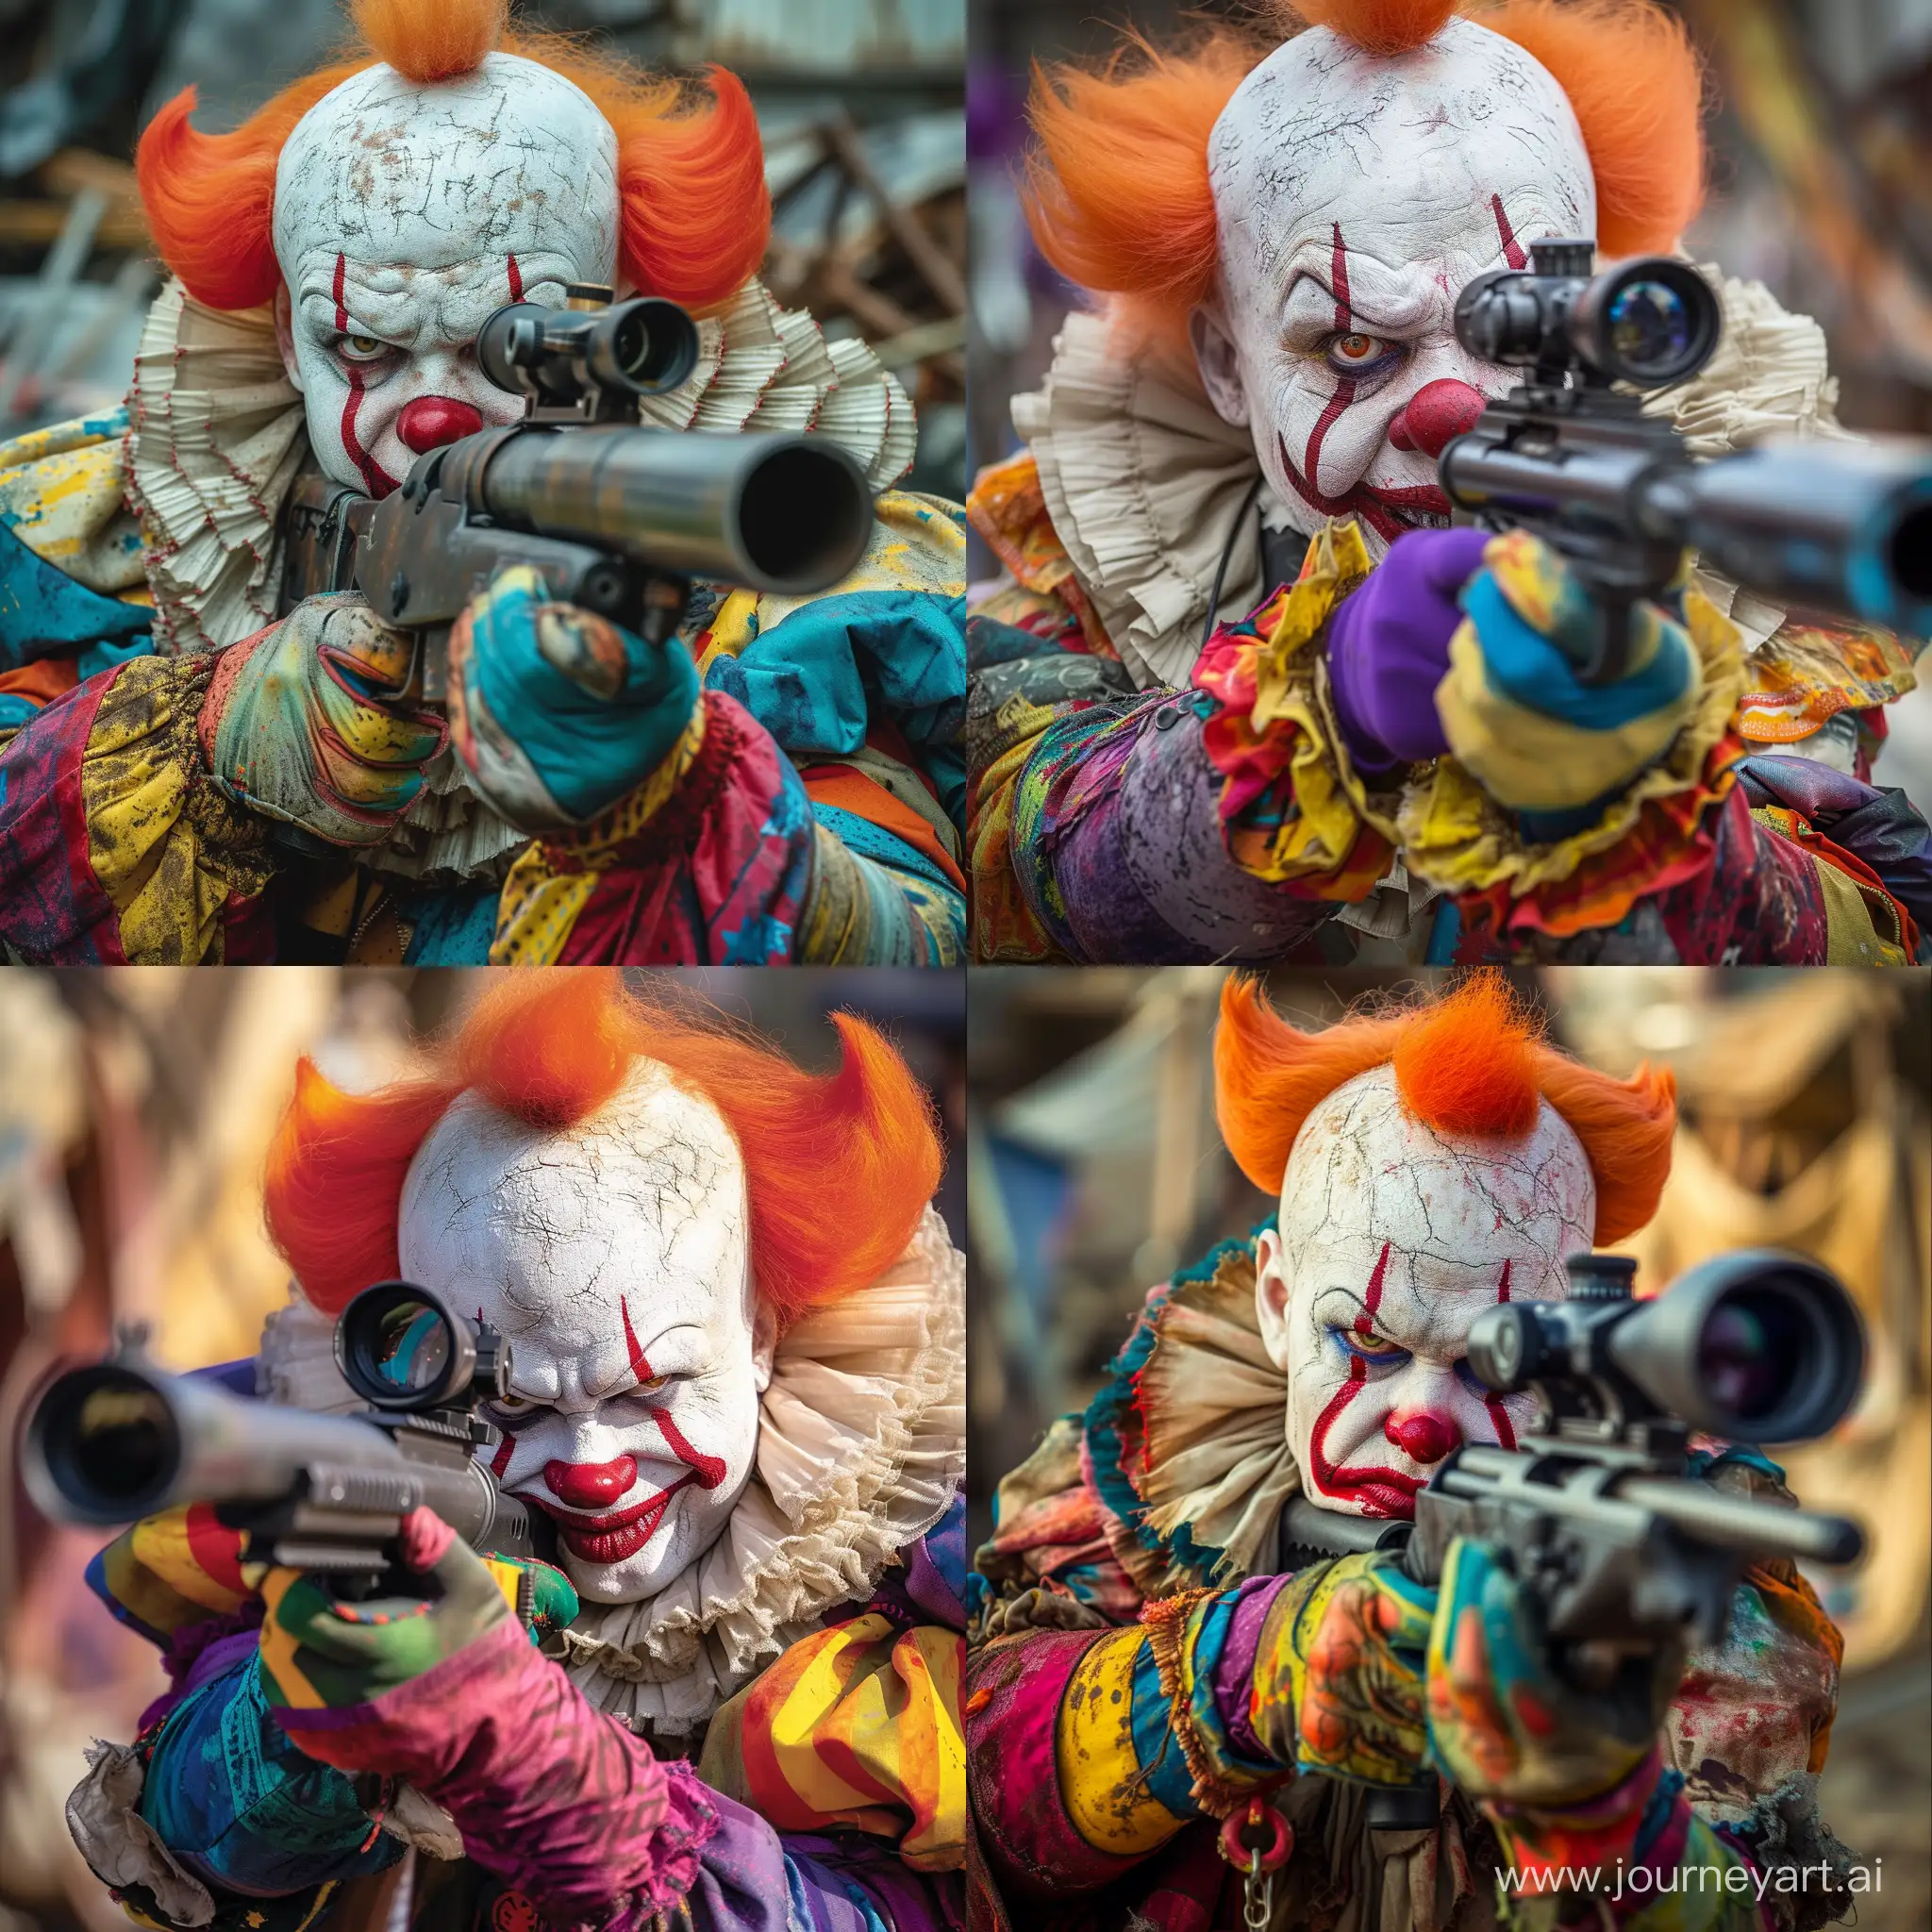 Menacing-Clown-with-Firearm-in-Chaotic-PostApocalyptic-Scene